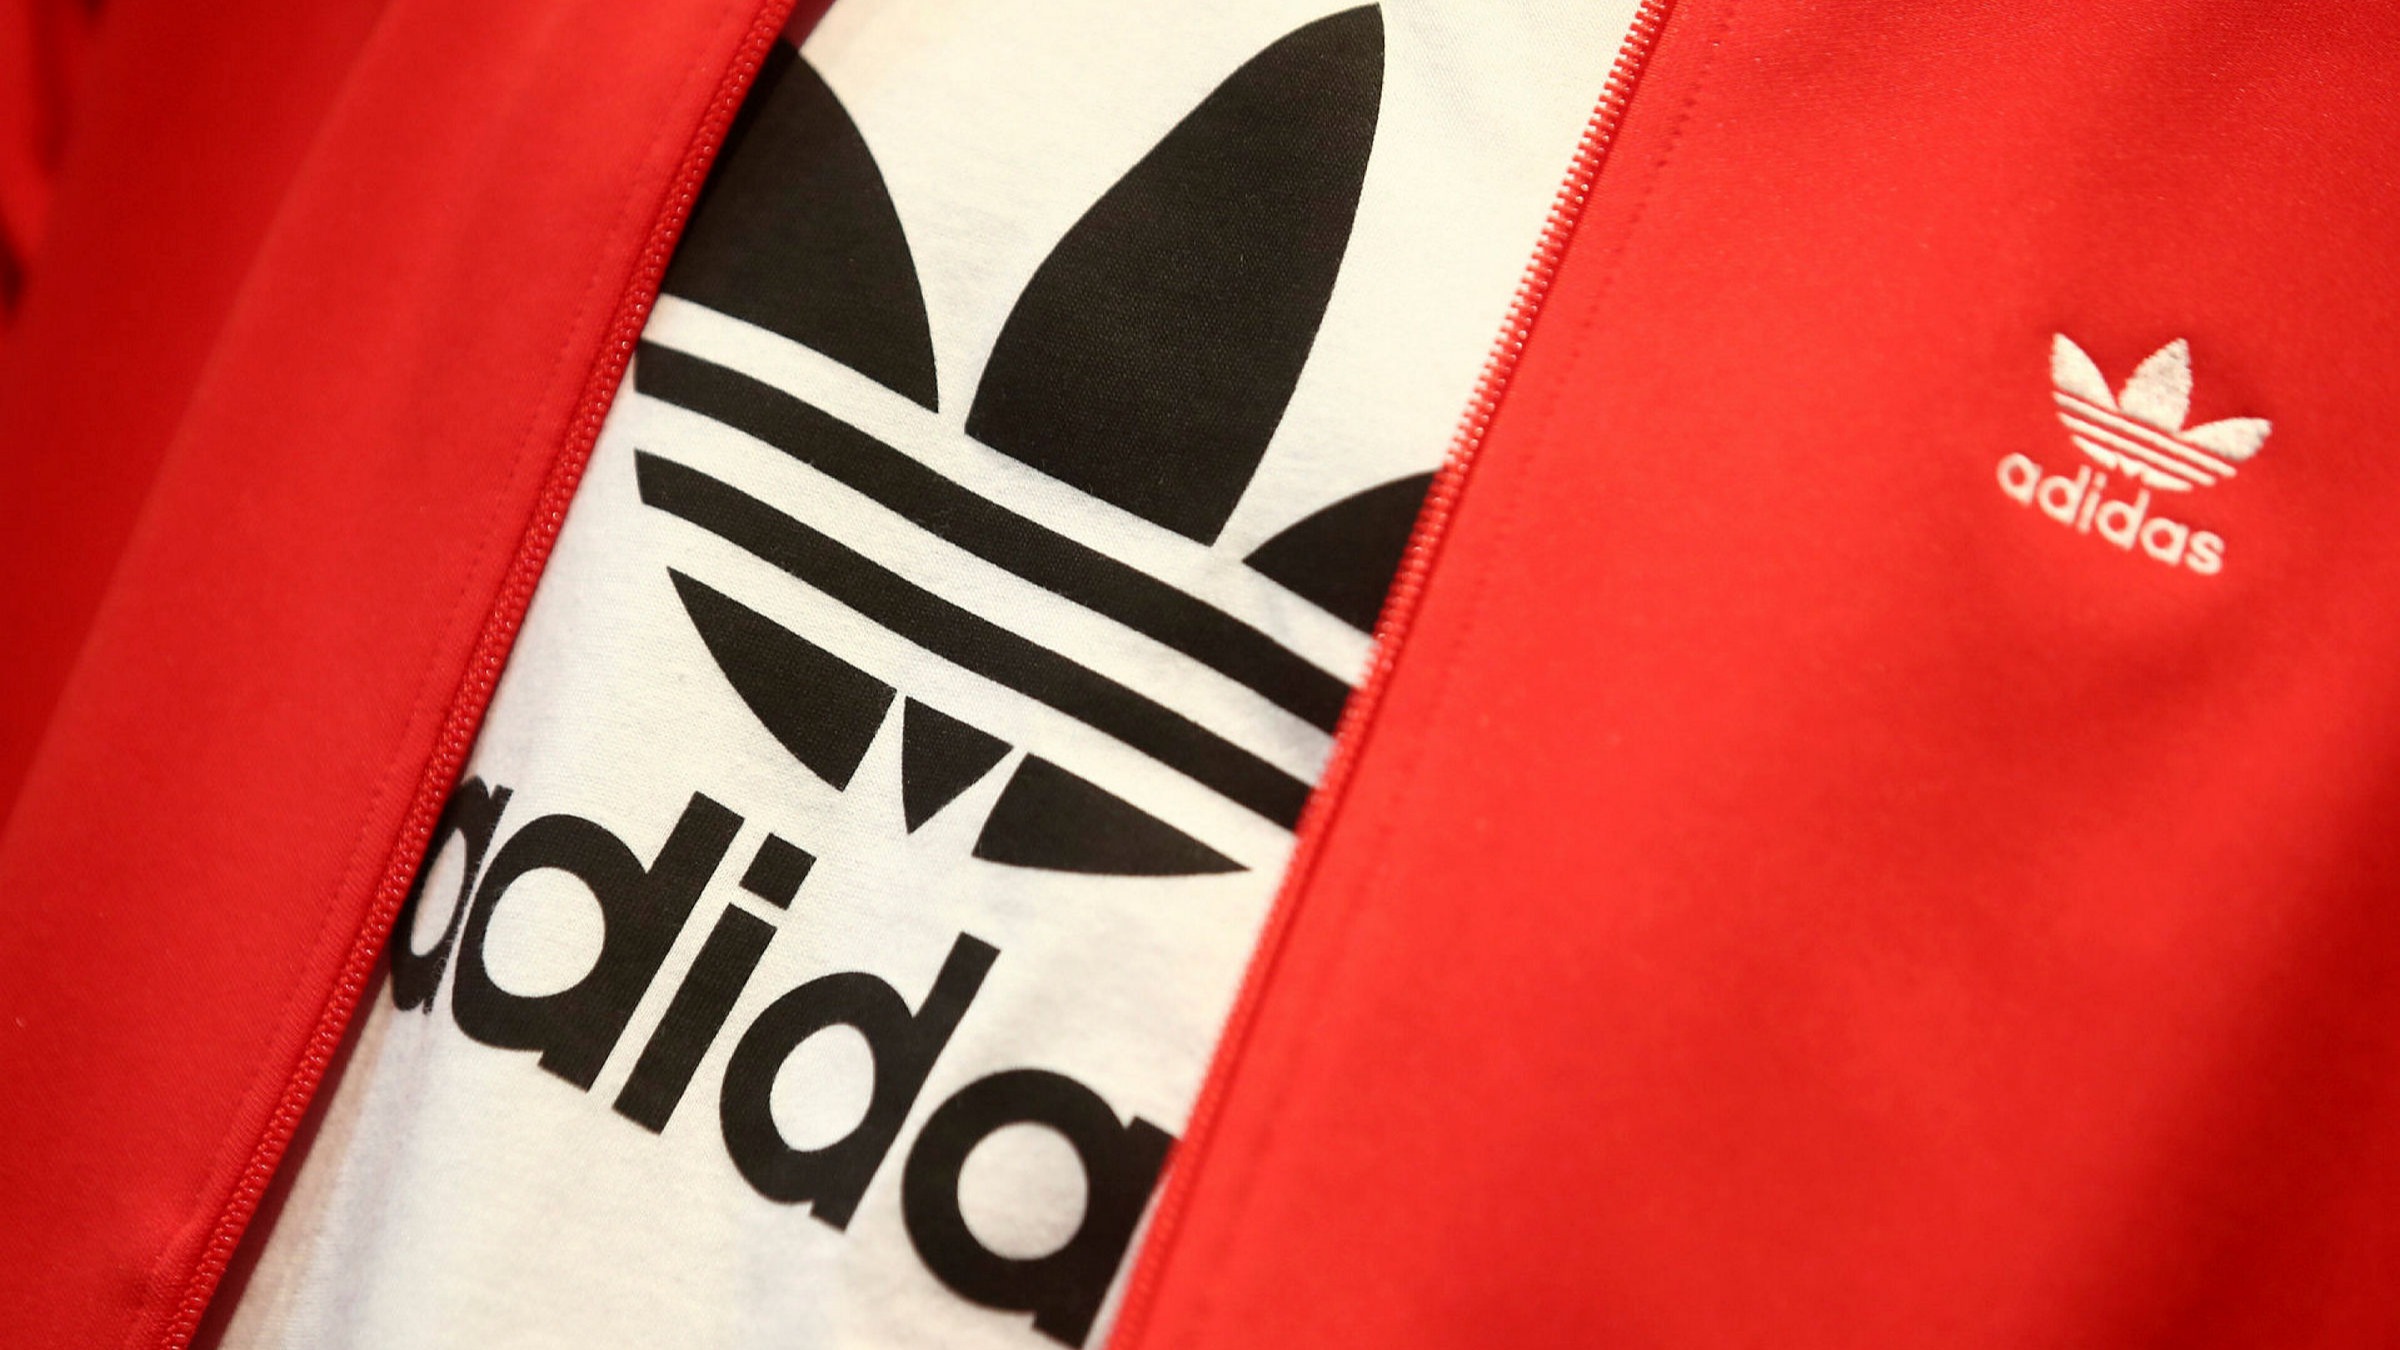 How Adidas Struggled To Respond To Antiracism Protests Financial Times